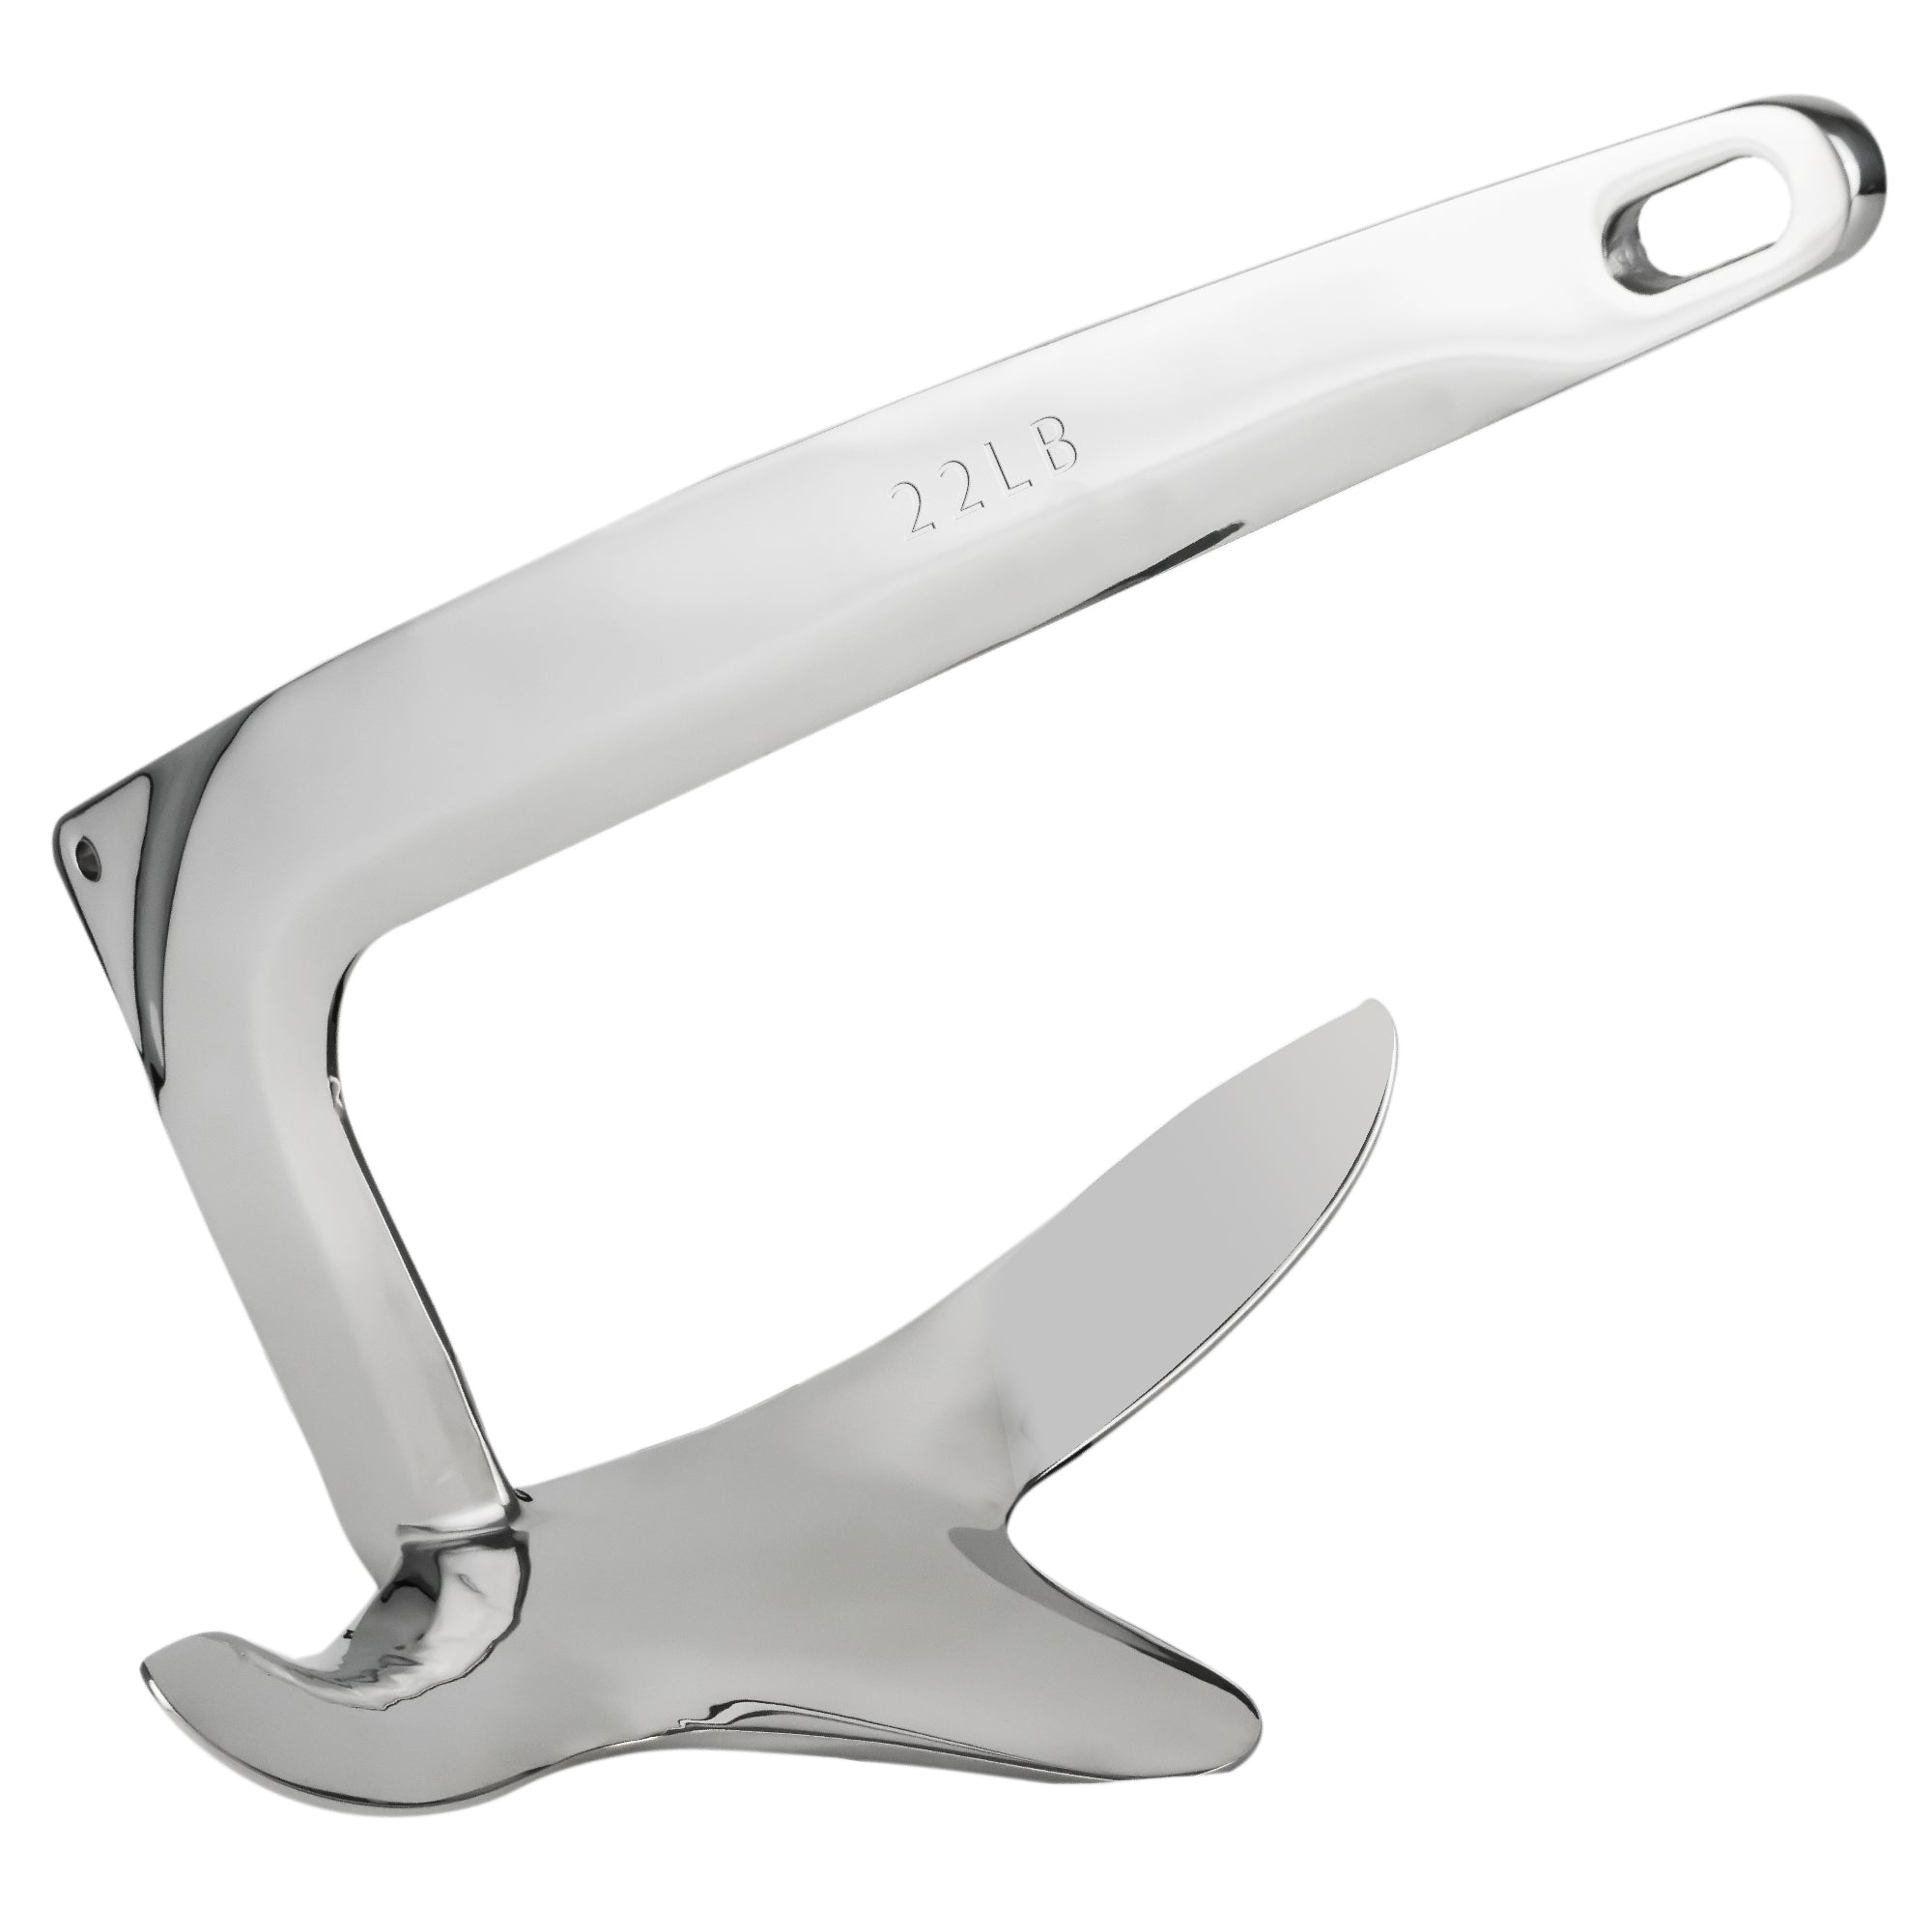 Bruce Style Claw Anchor, 22 Lb / 10 Kg, Stainless Steel - FO337